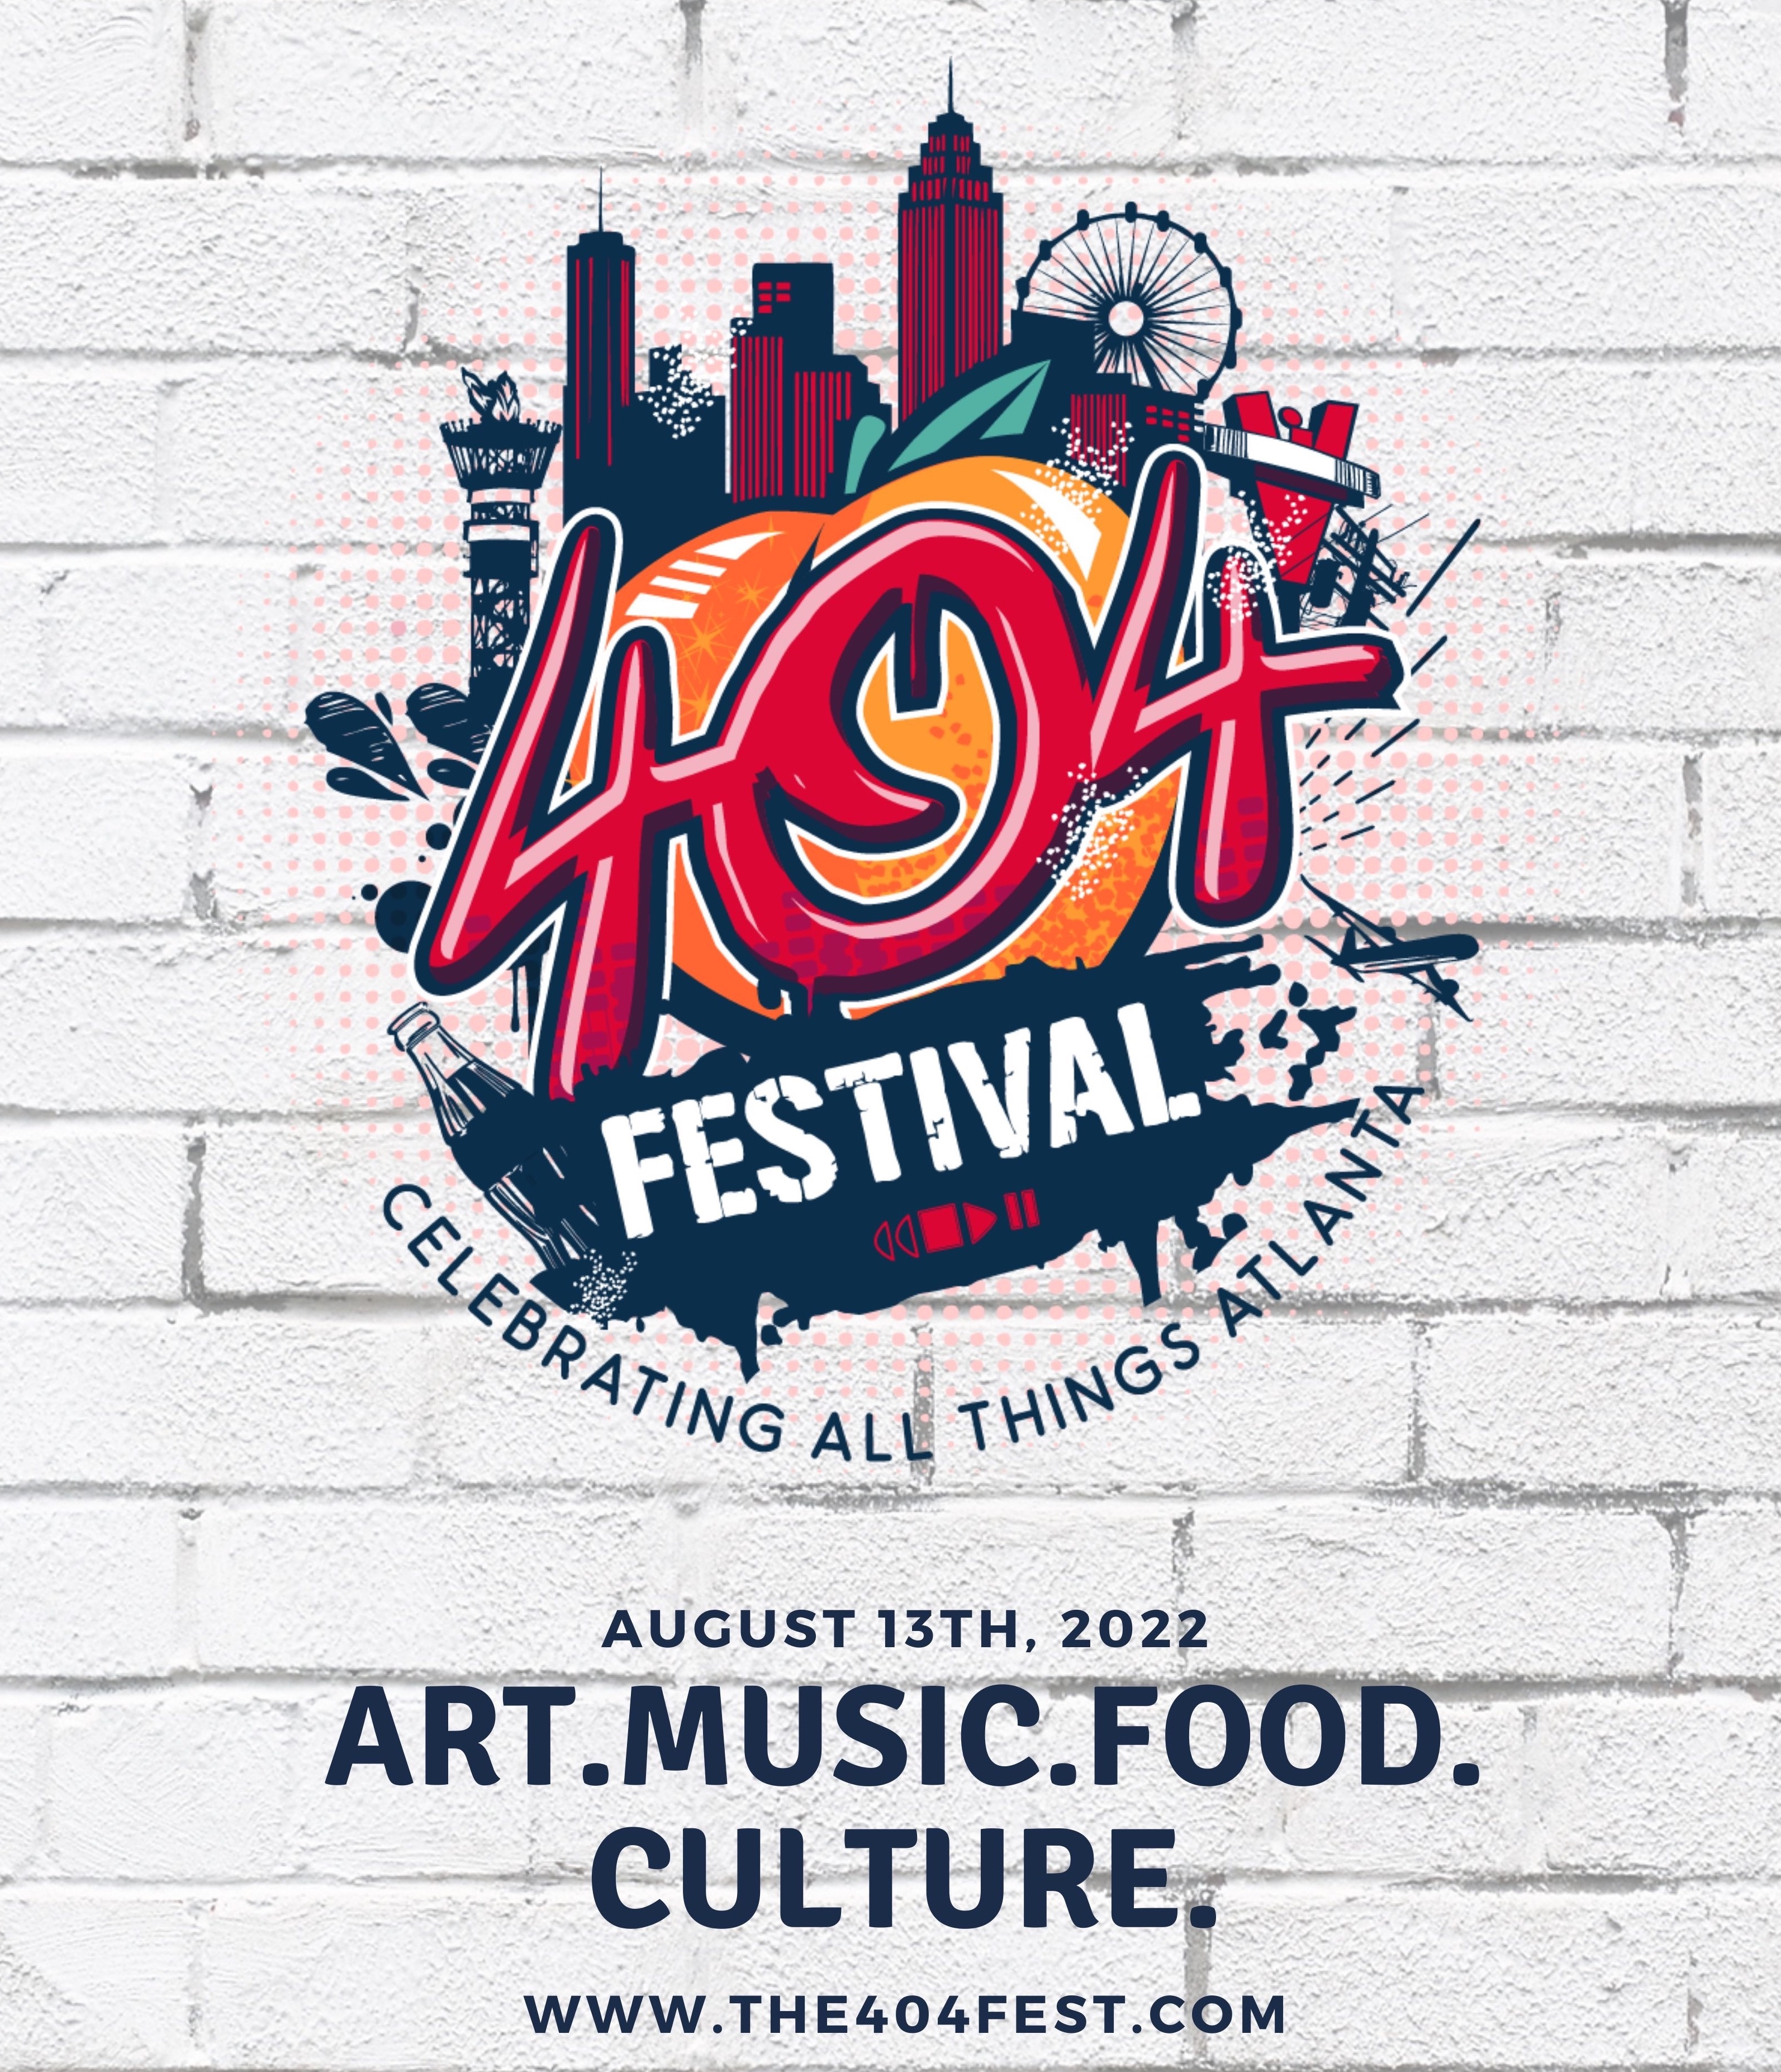 404 Festival T0 Celebrate All Things Atlanta, August 13th At